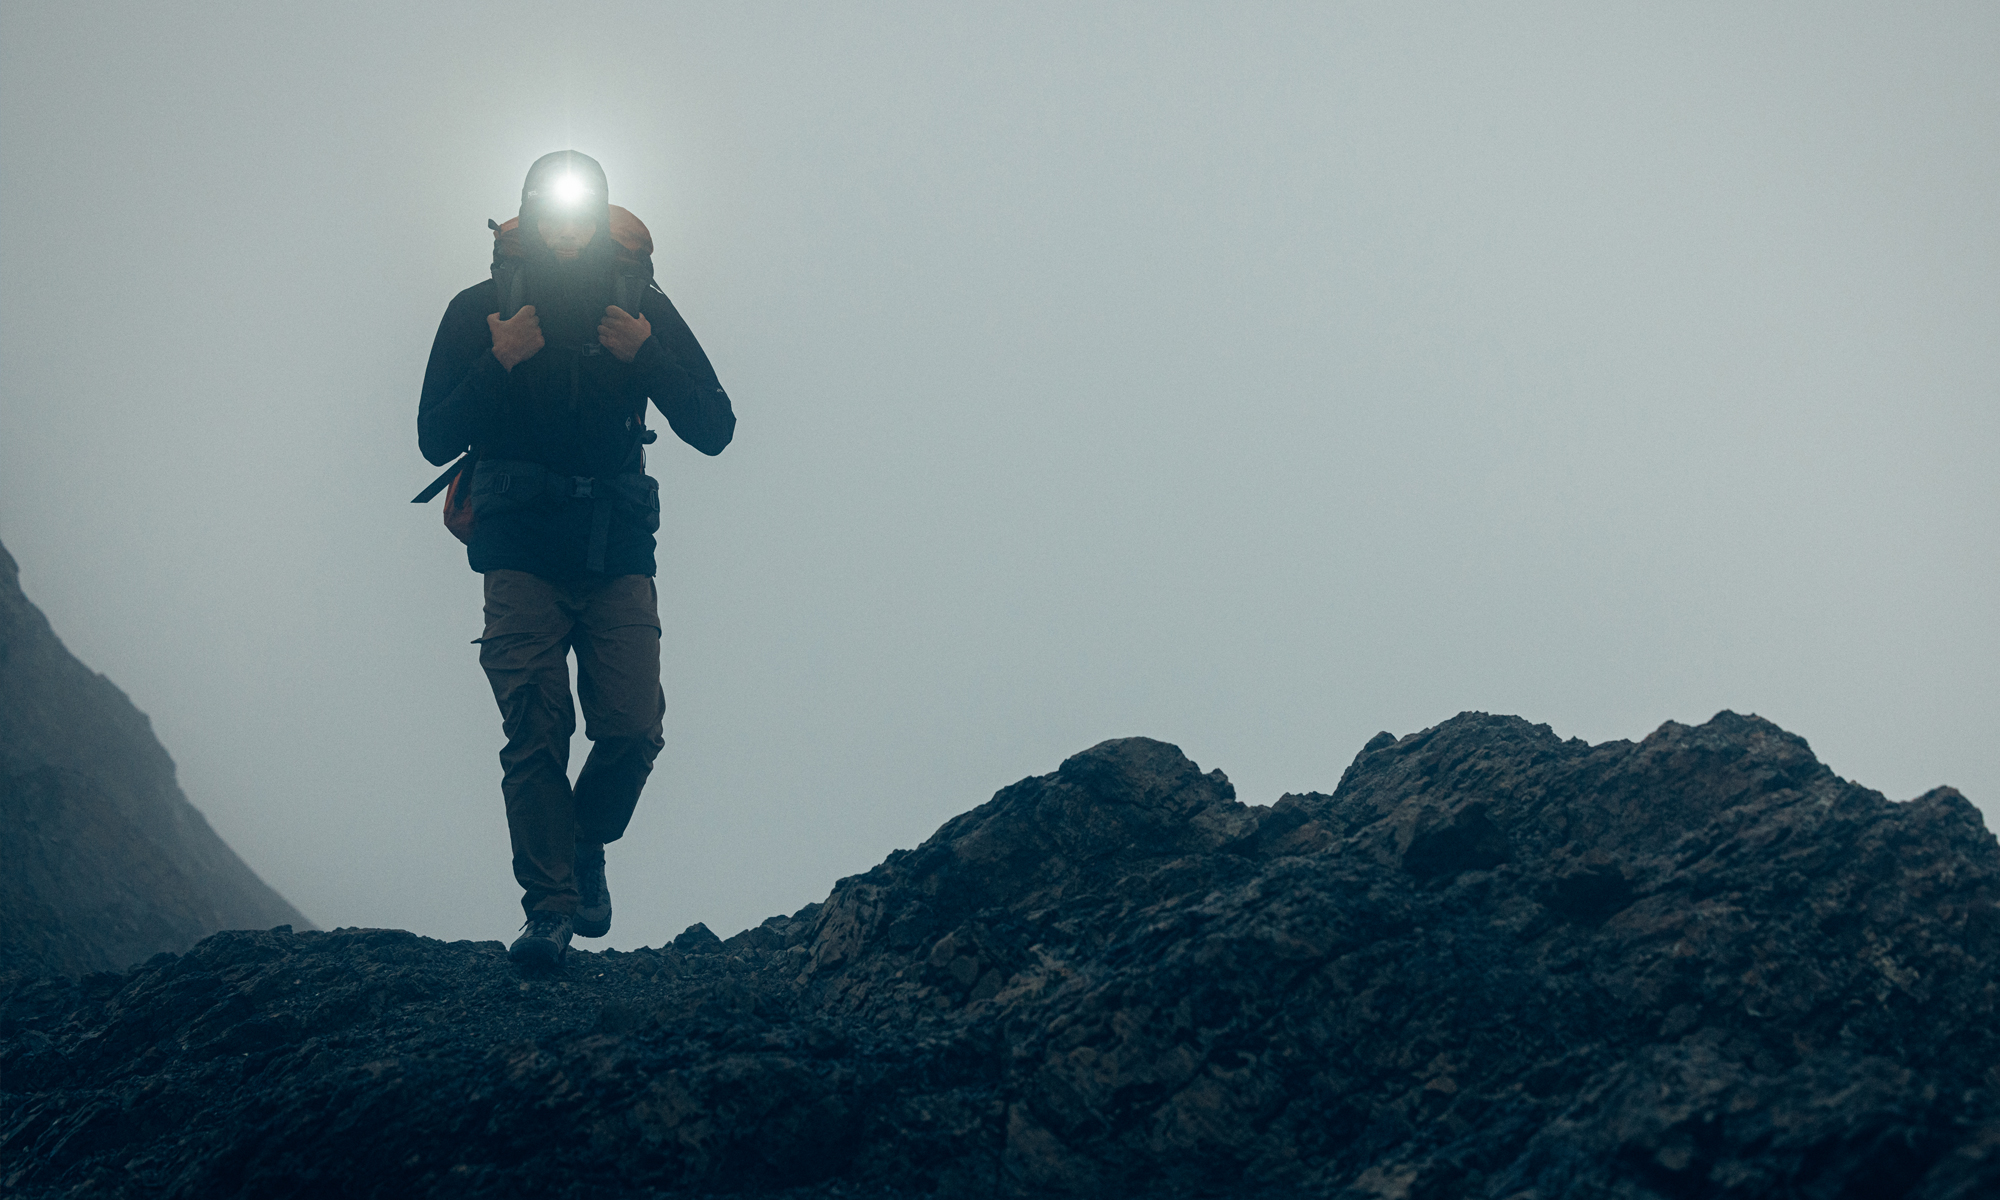 Backpacker with a headlamp in foggy conditions on rocky terrain.